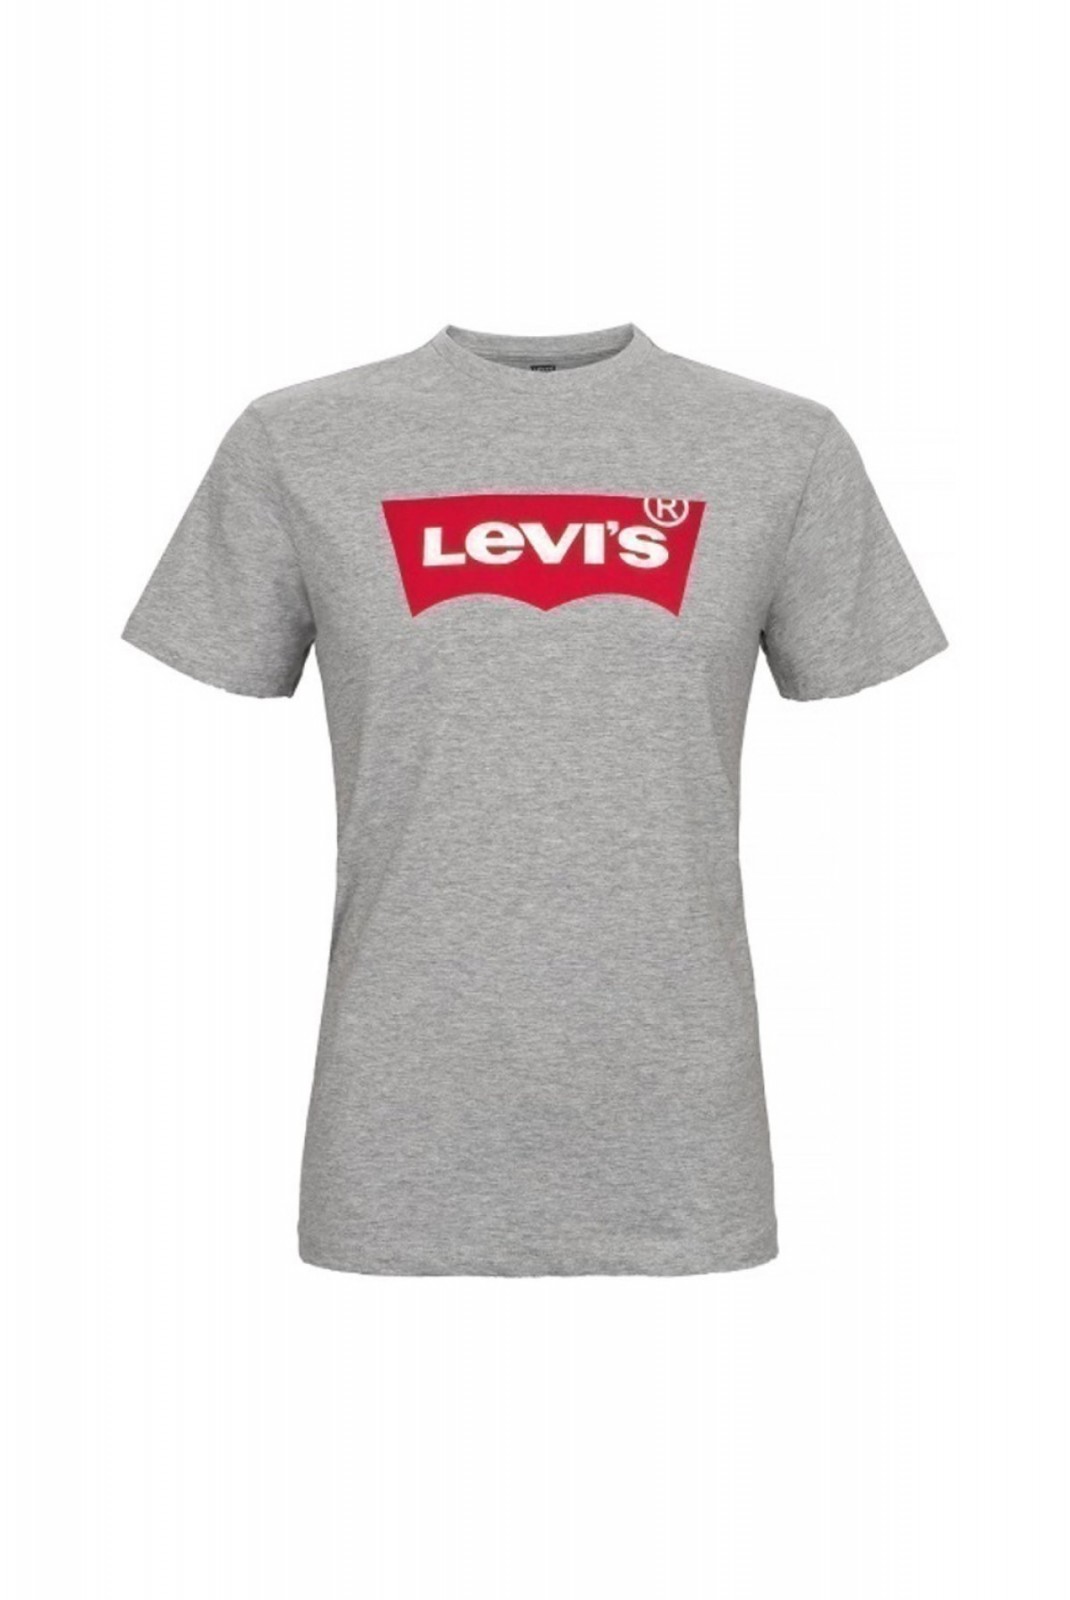 T-shirt - LEVI'S - Grey / Red Levi's 0138 Grey/Red 17783-0138